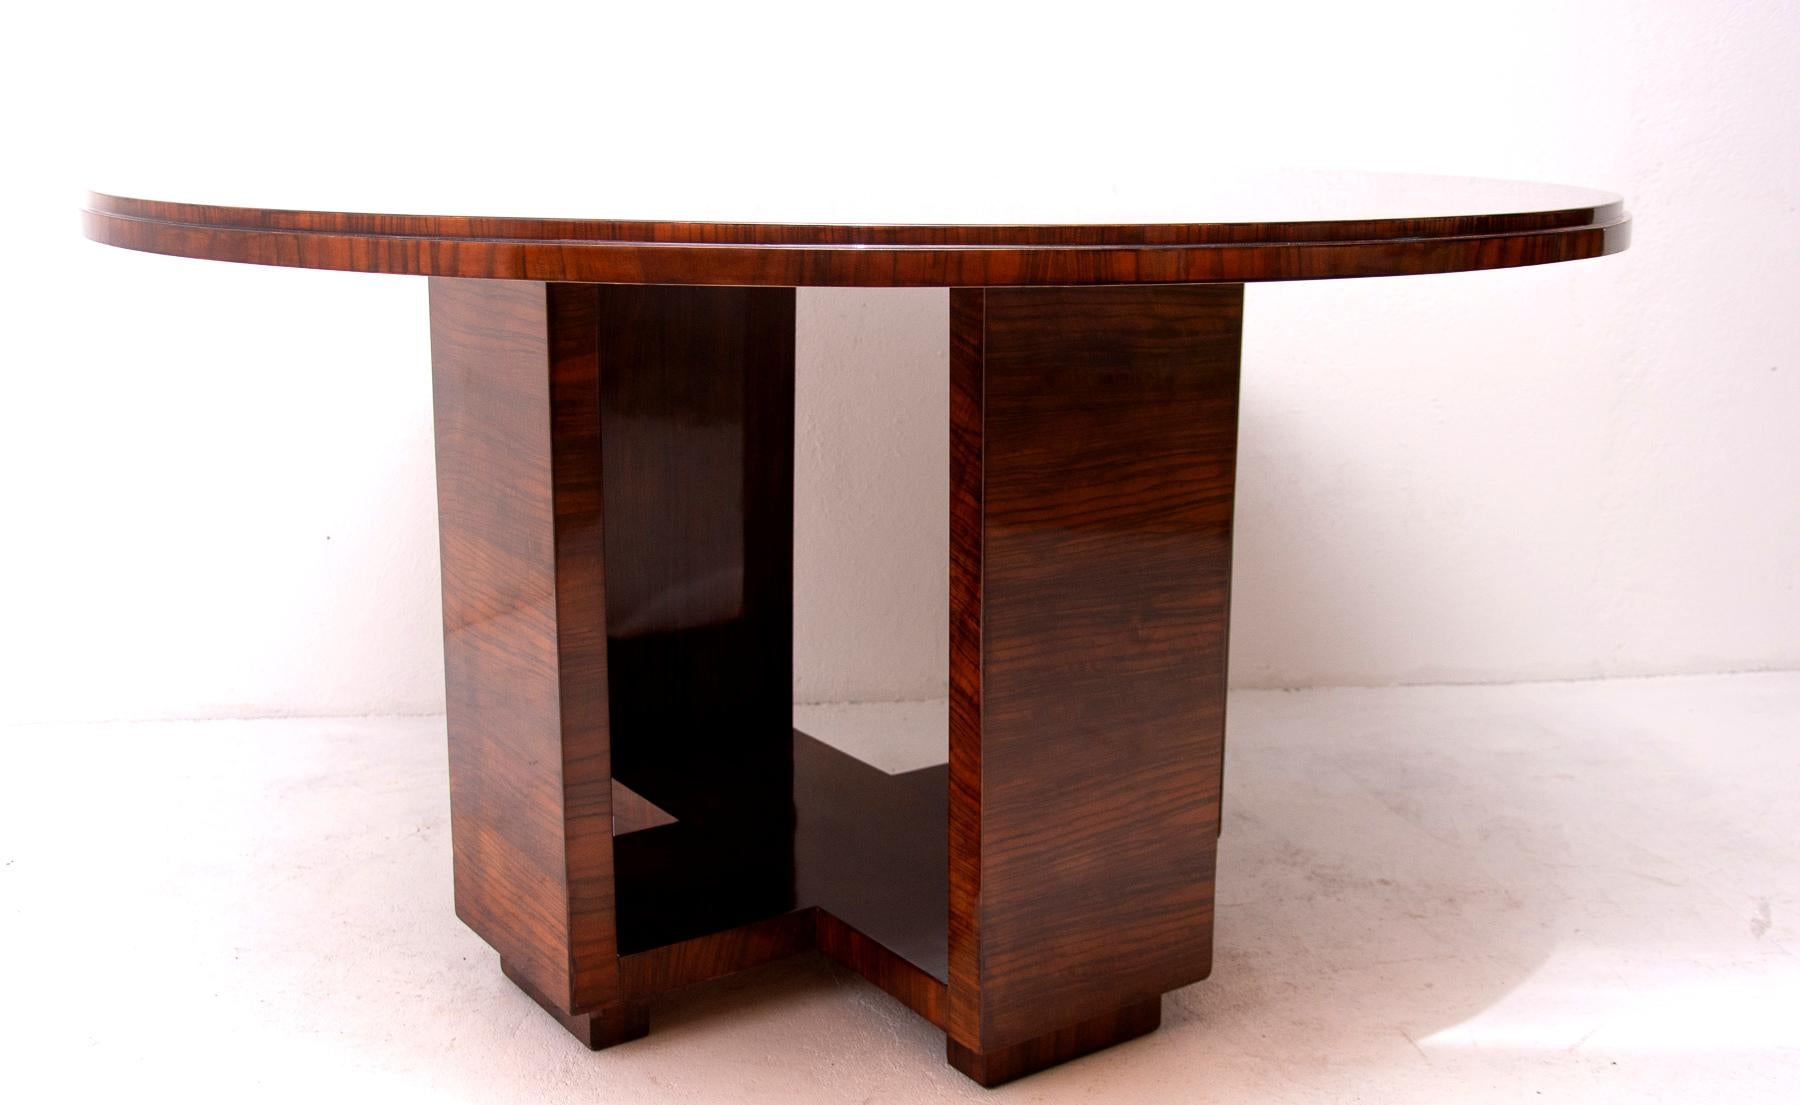 This Art Deco/Functionalist dining table was made in the 1930s in Bohemia, designed by the famous Prague architect Vlastimil Brožek. The bottom part features a regular shaped legs typical for Functionalism in the 1930s. The table was created by an